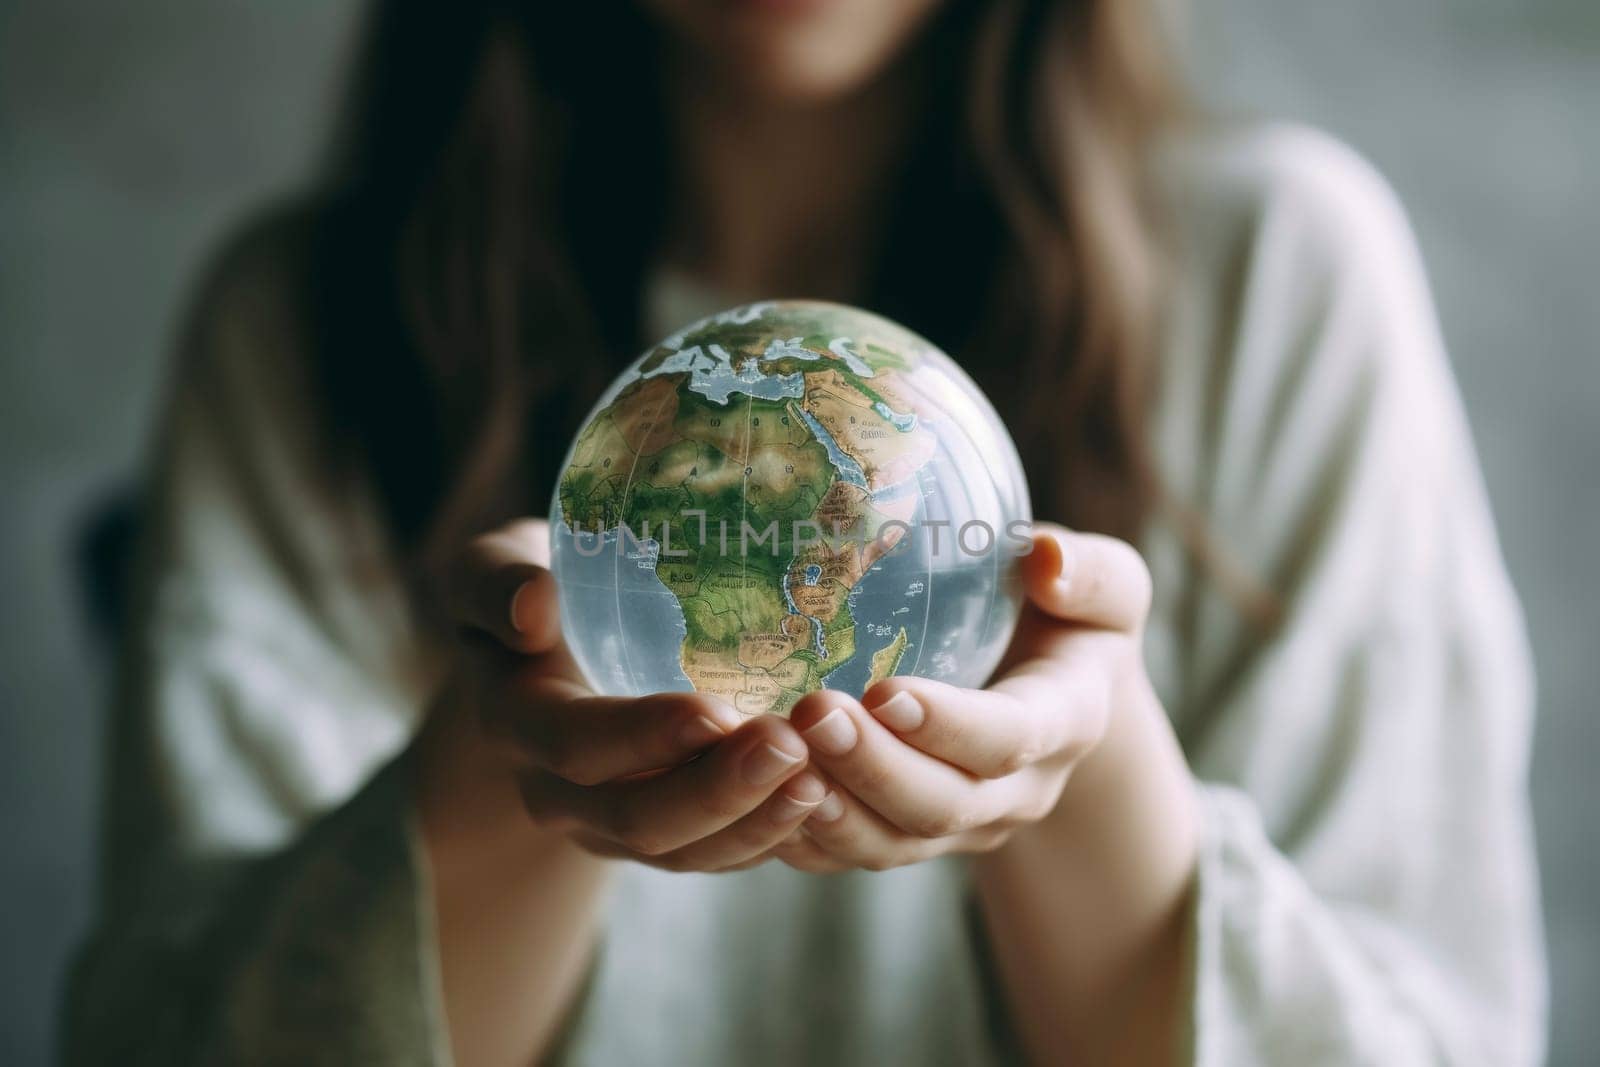 A woman holds a small globe gently in her hands, symbolizing care and stewardship for the planet. The focus on the globe suggests environmental awareness and global responsibility.